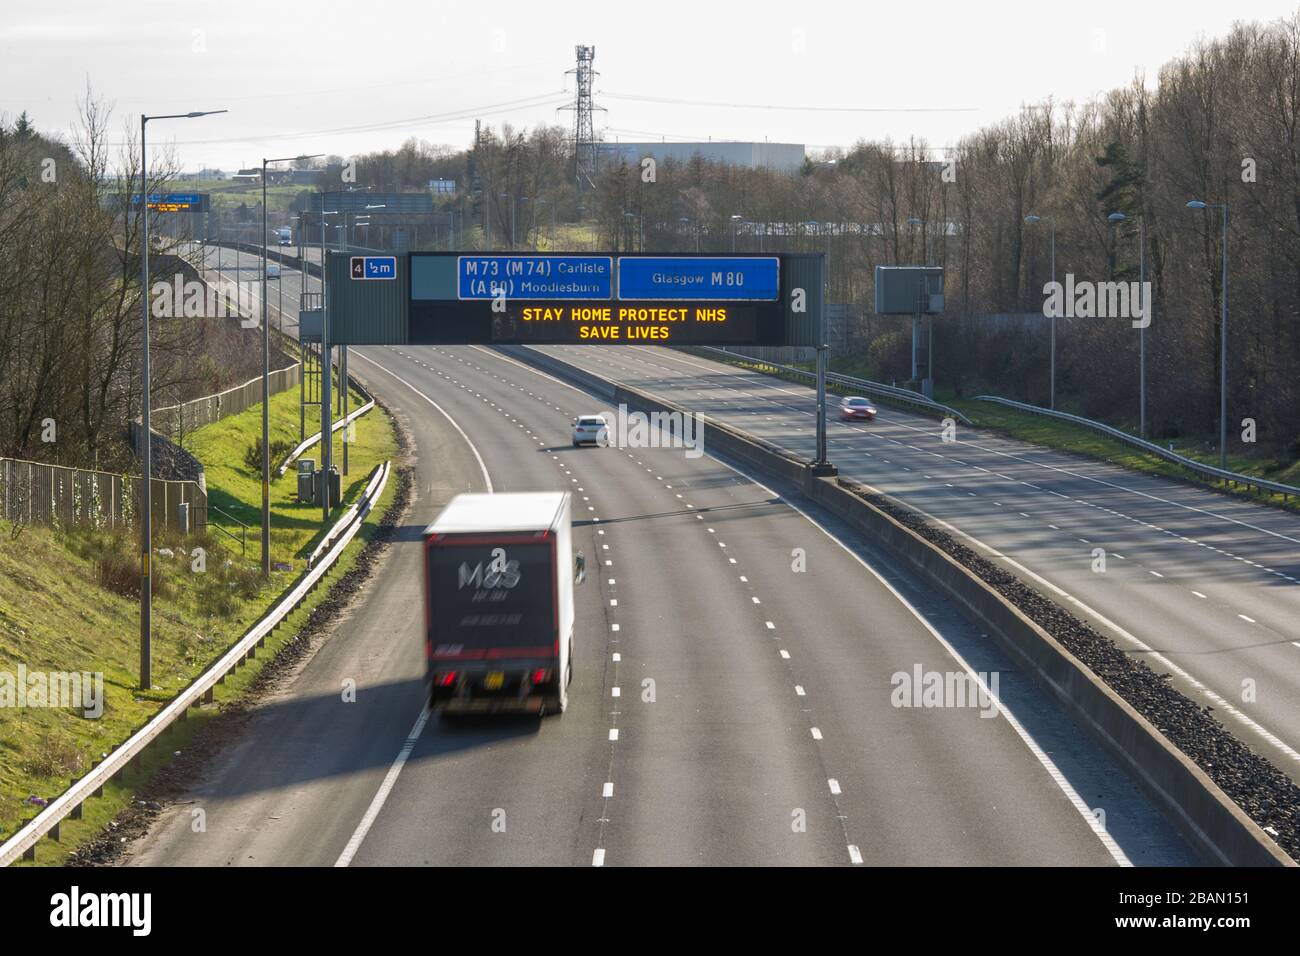 Glasgow, UK. 28th Mar, 2020. Pictured: Road signs all along the M8 and M80 motorways which read, “STAY HOME PROTECT NHS SAVE LIVES” The Coronavirus Pandemic has forced the UK Government to order a shut down of all the UK major cities and make people stay at home, which has left the motorways and all other roads free of the usual nose to tail traffic which would otherwise be there. Credit: Colin Fisher/Alamy Live News Stock Photo